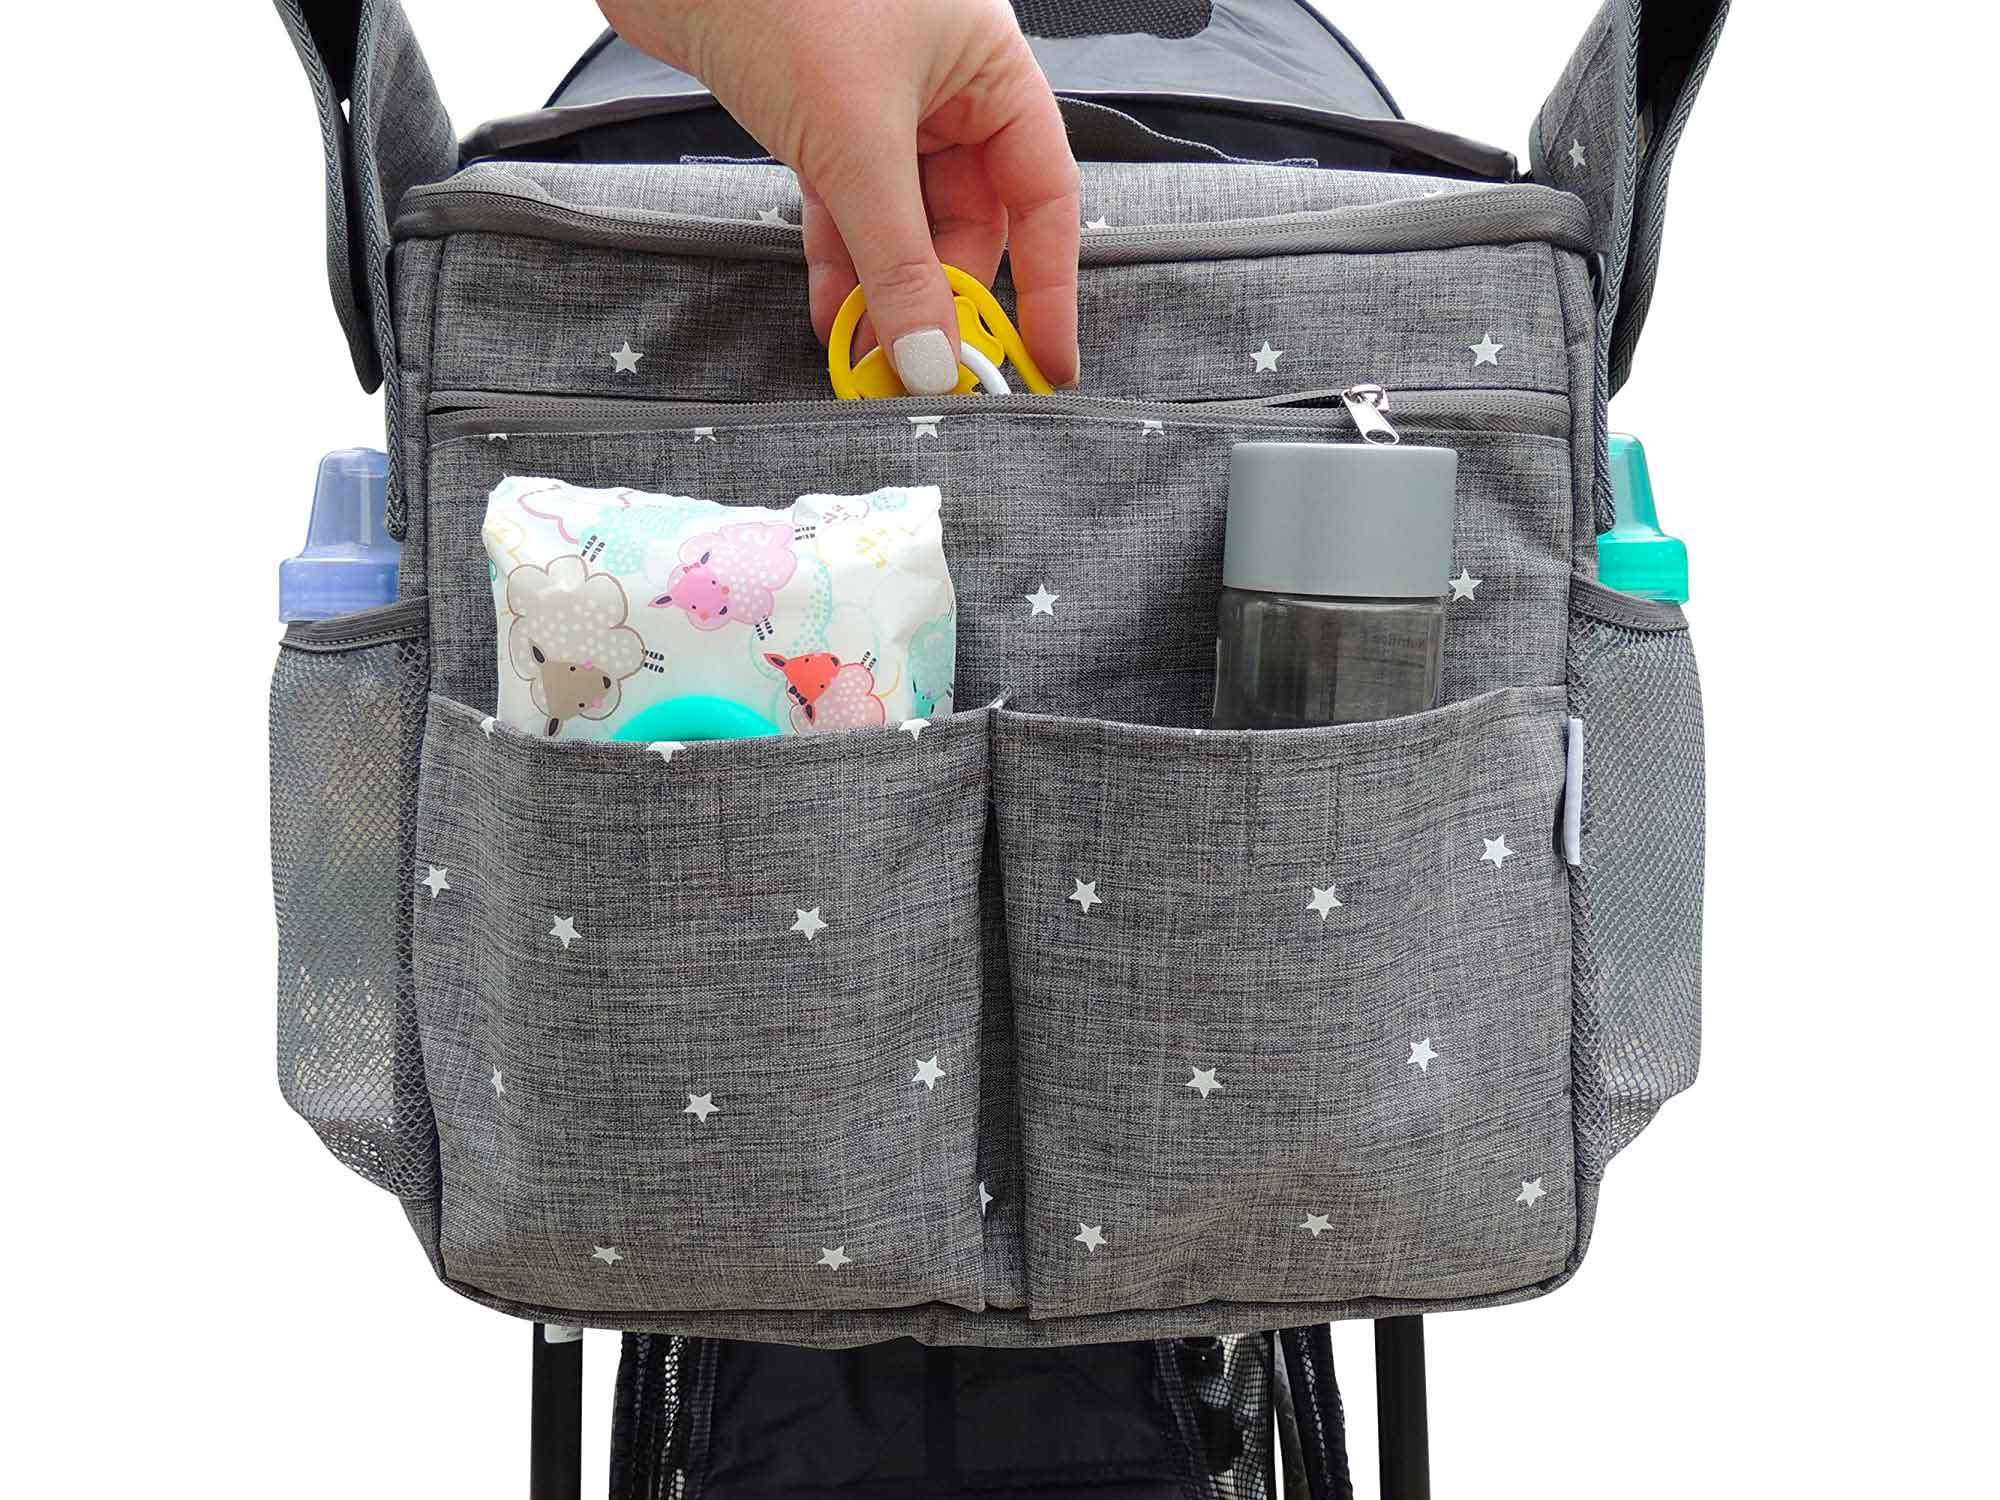 Universal Parents Diaper Organizer Bag with Stroller Attachments. Large Strollers Insulated Baby Bag. Gift for Newborns, Infants, Toddlers, Babies. 3 Ways to Carry - Shoulder, Messenger Bag, Backpack.